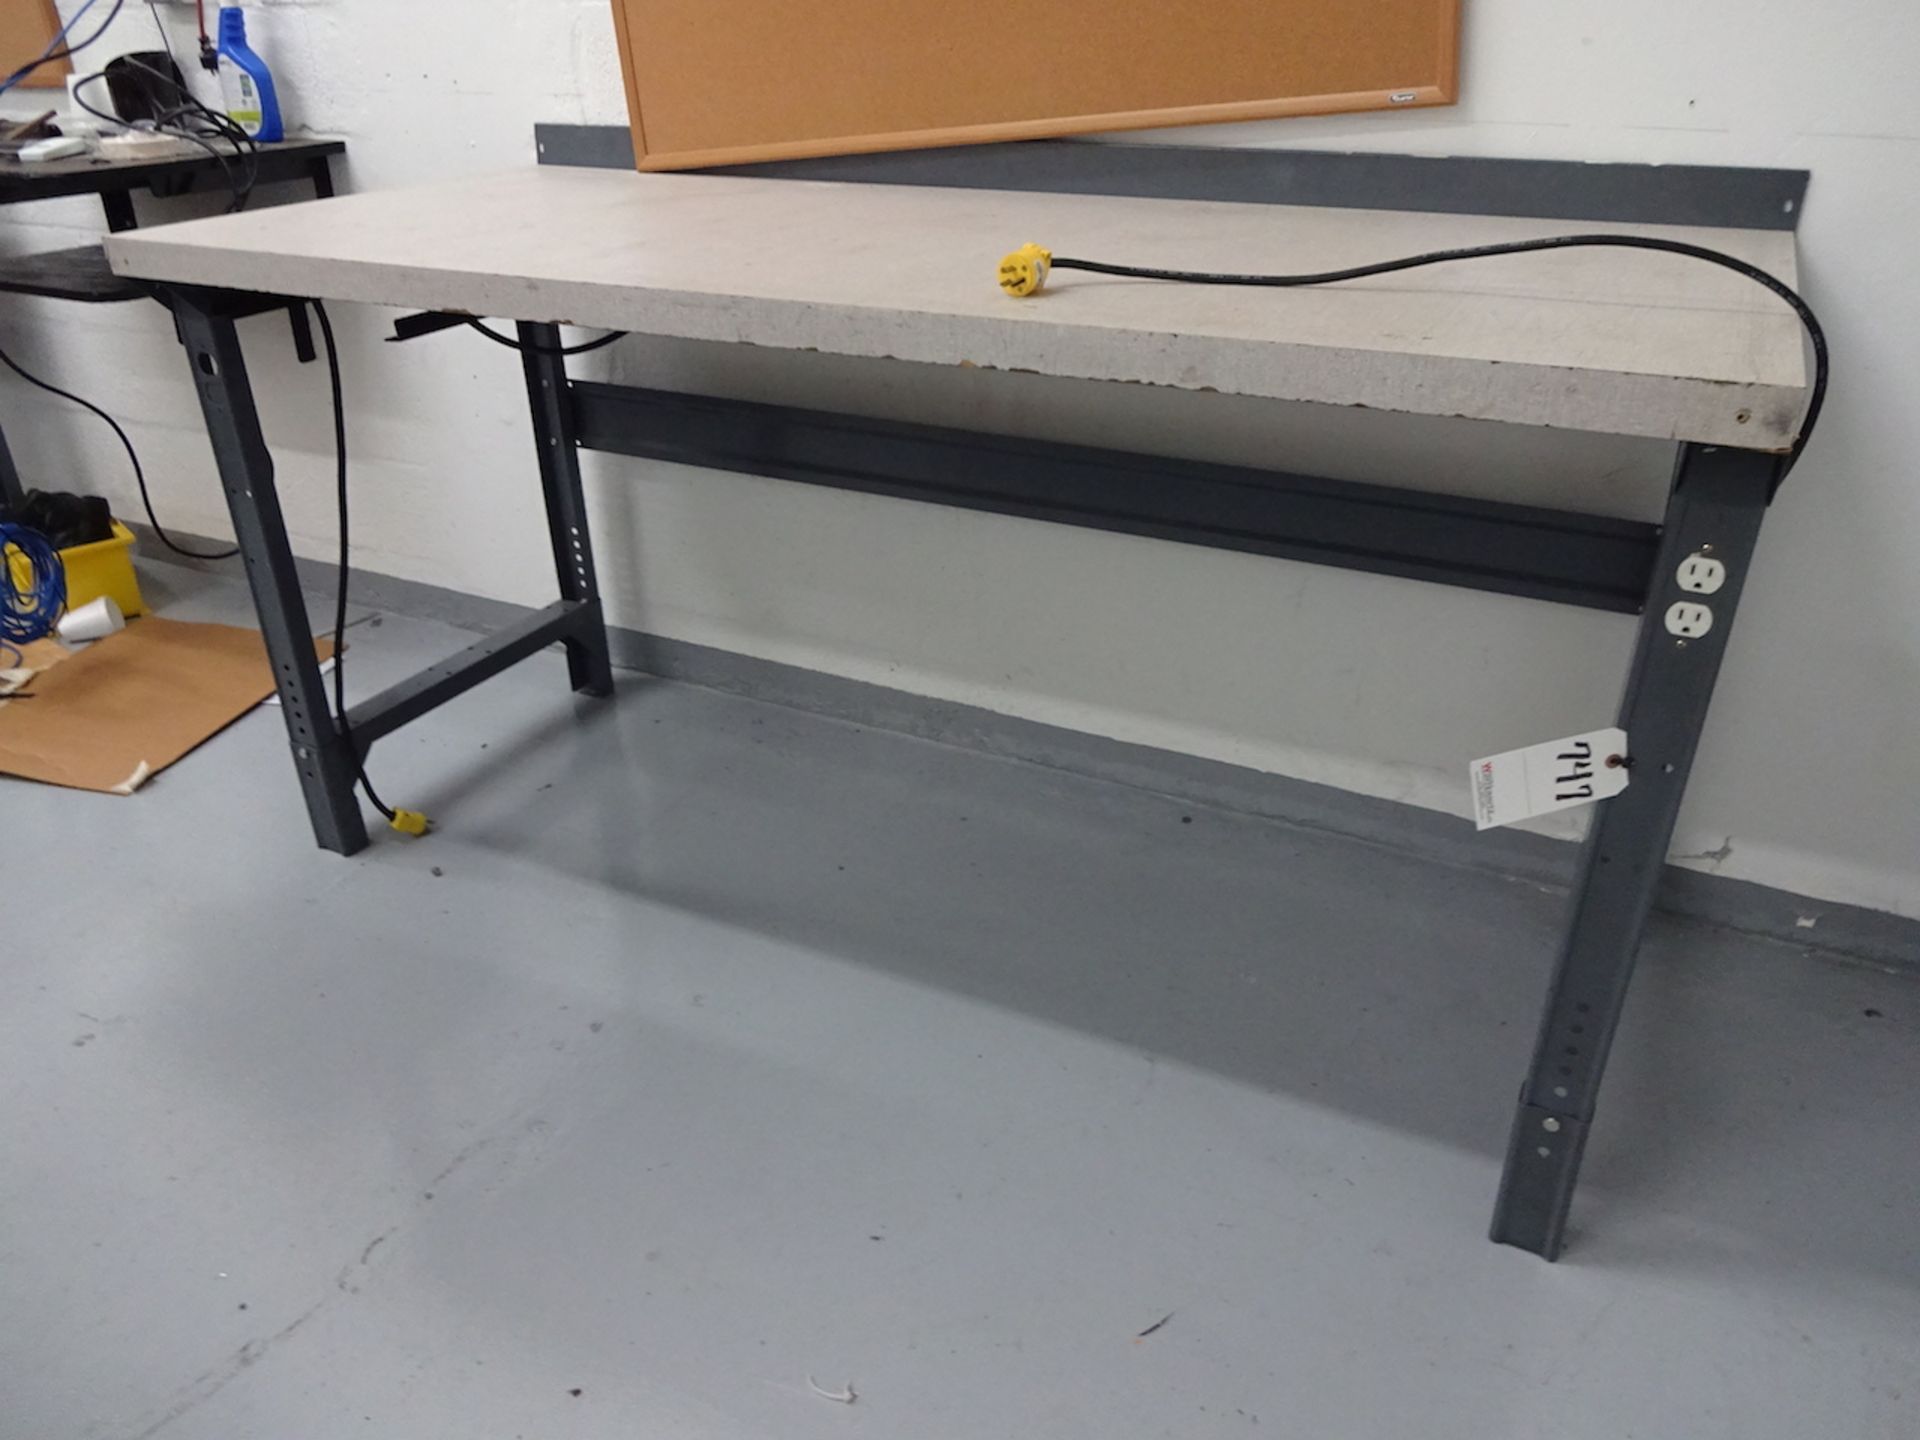 30" X 72" (APPROX.) WORK BENCH; Wood Top & Electrical Outlets